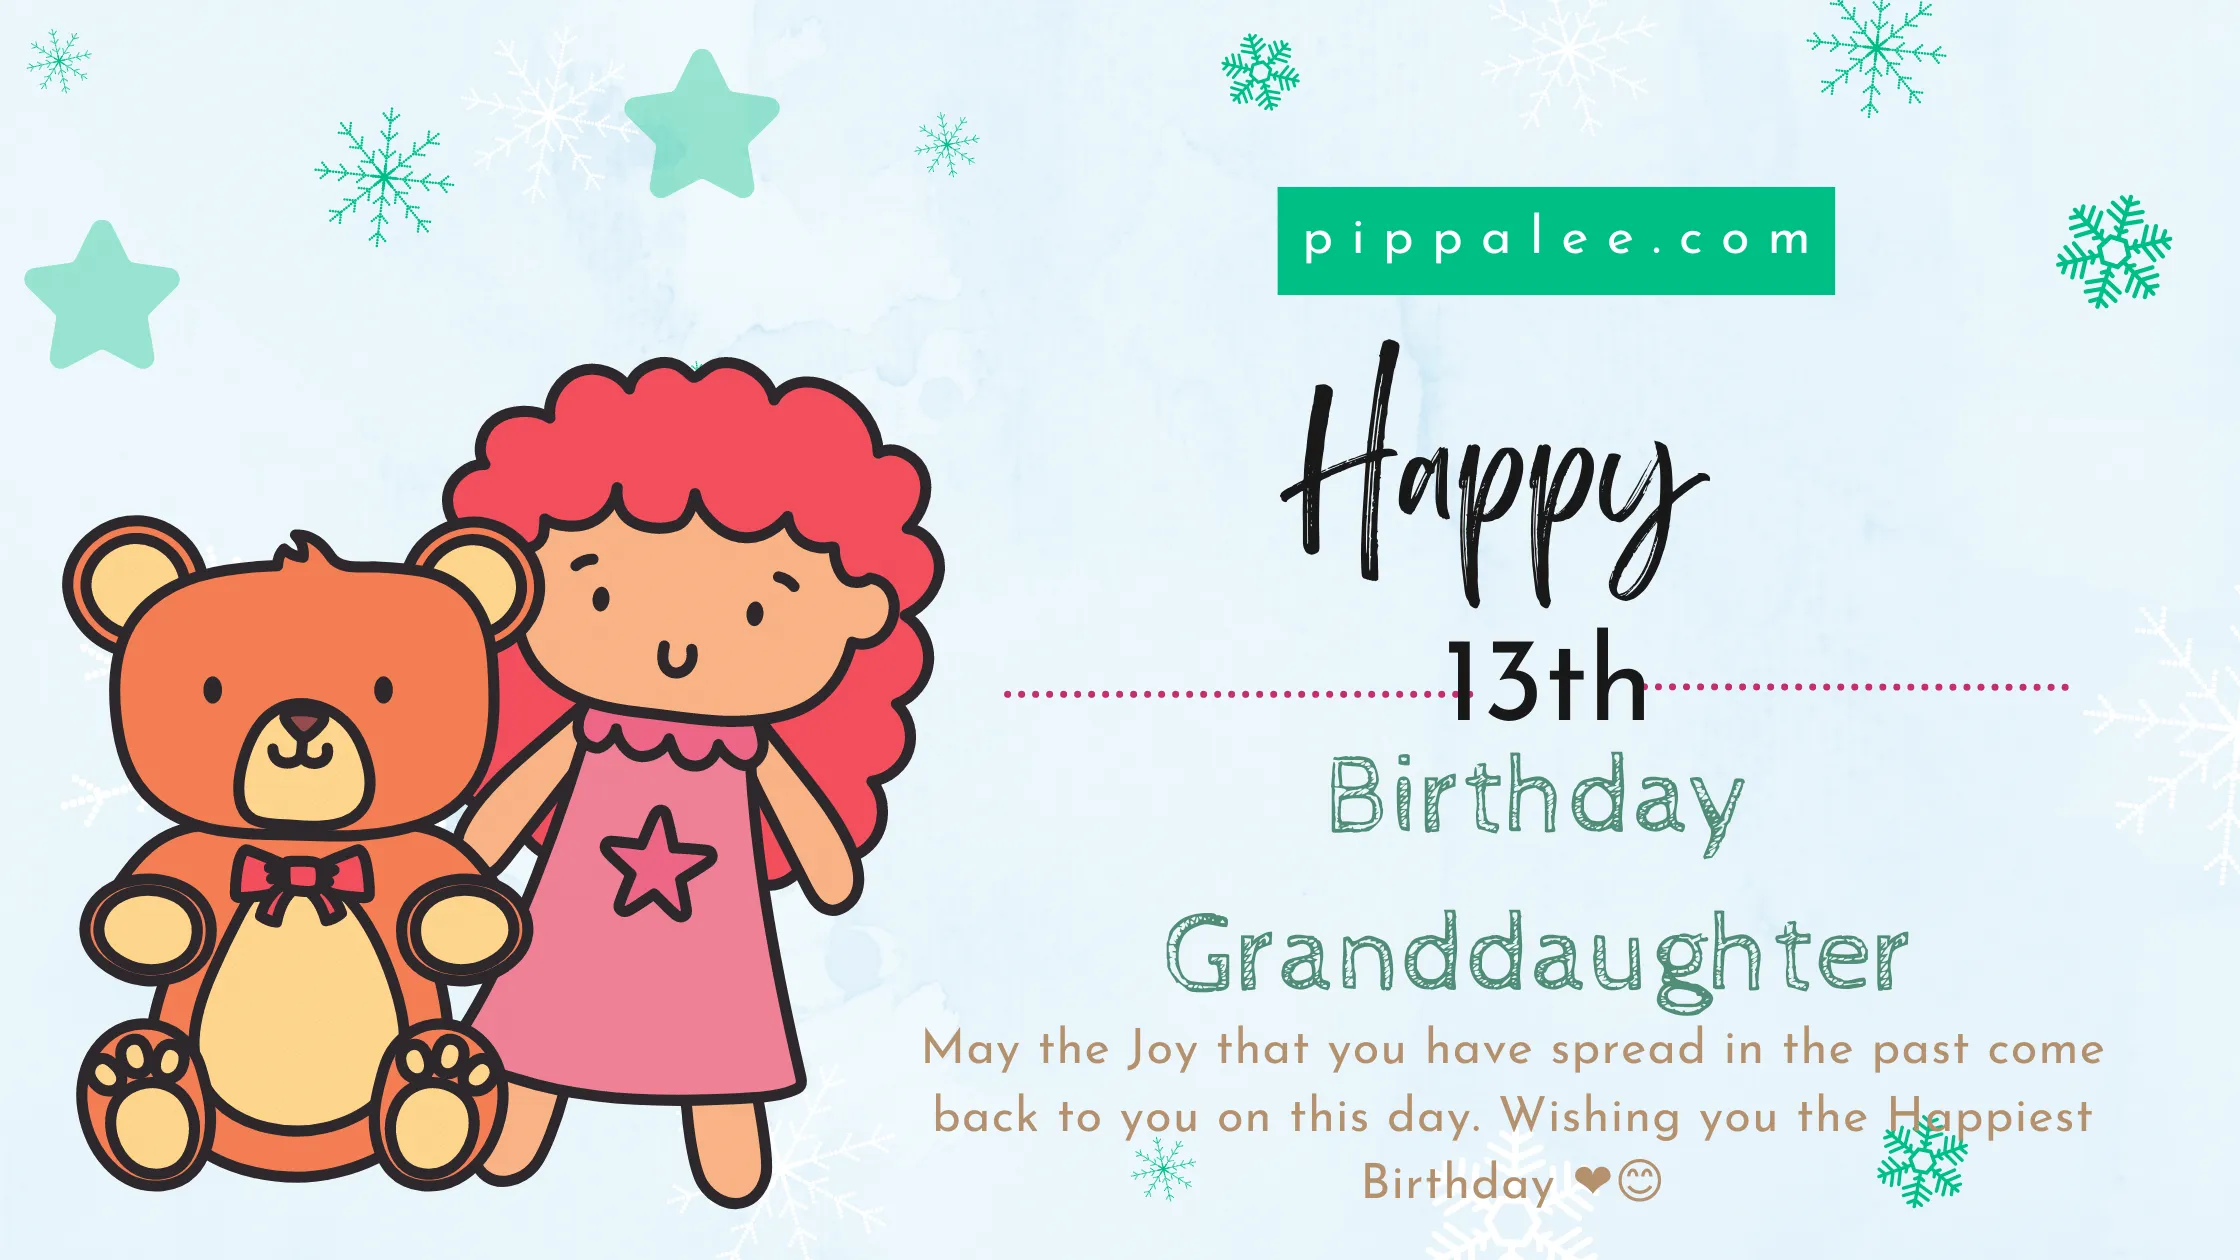 Happy 13th Birthday Granddaughter - Wishes & Messages